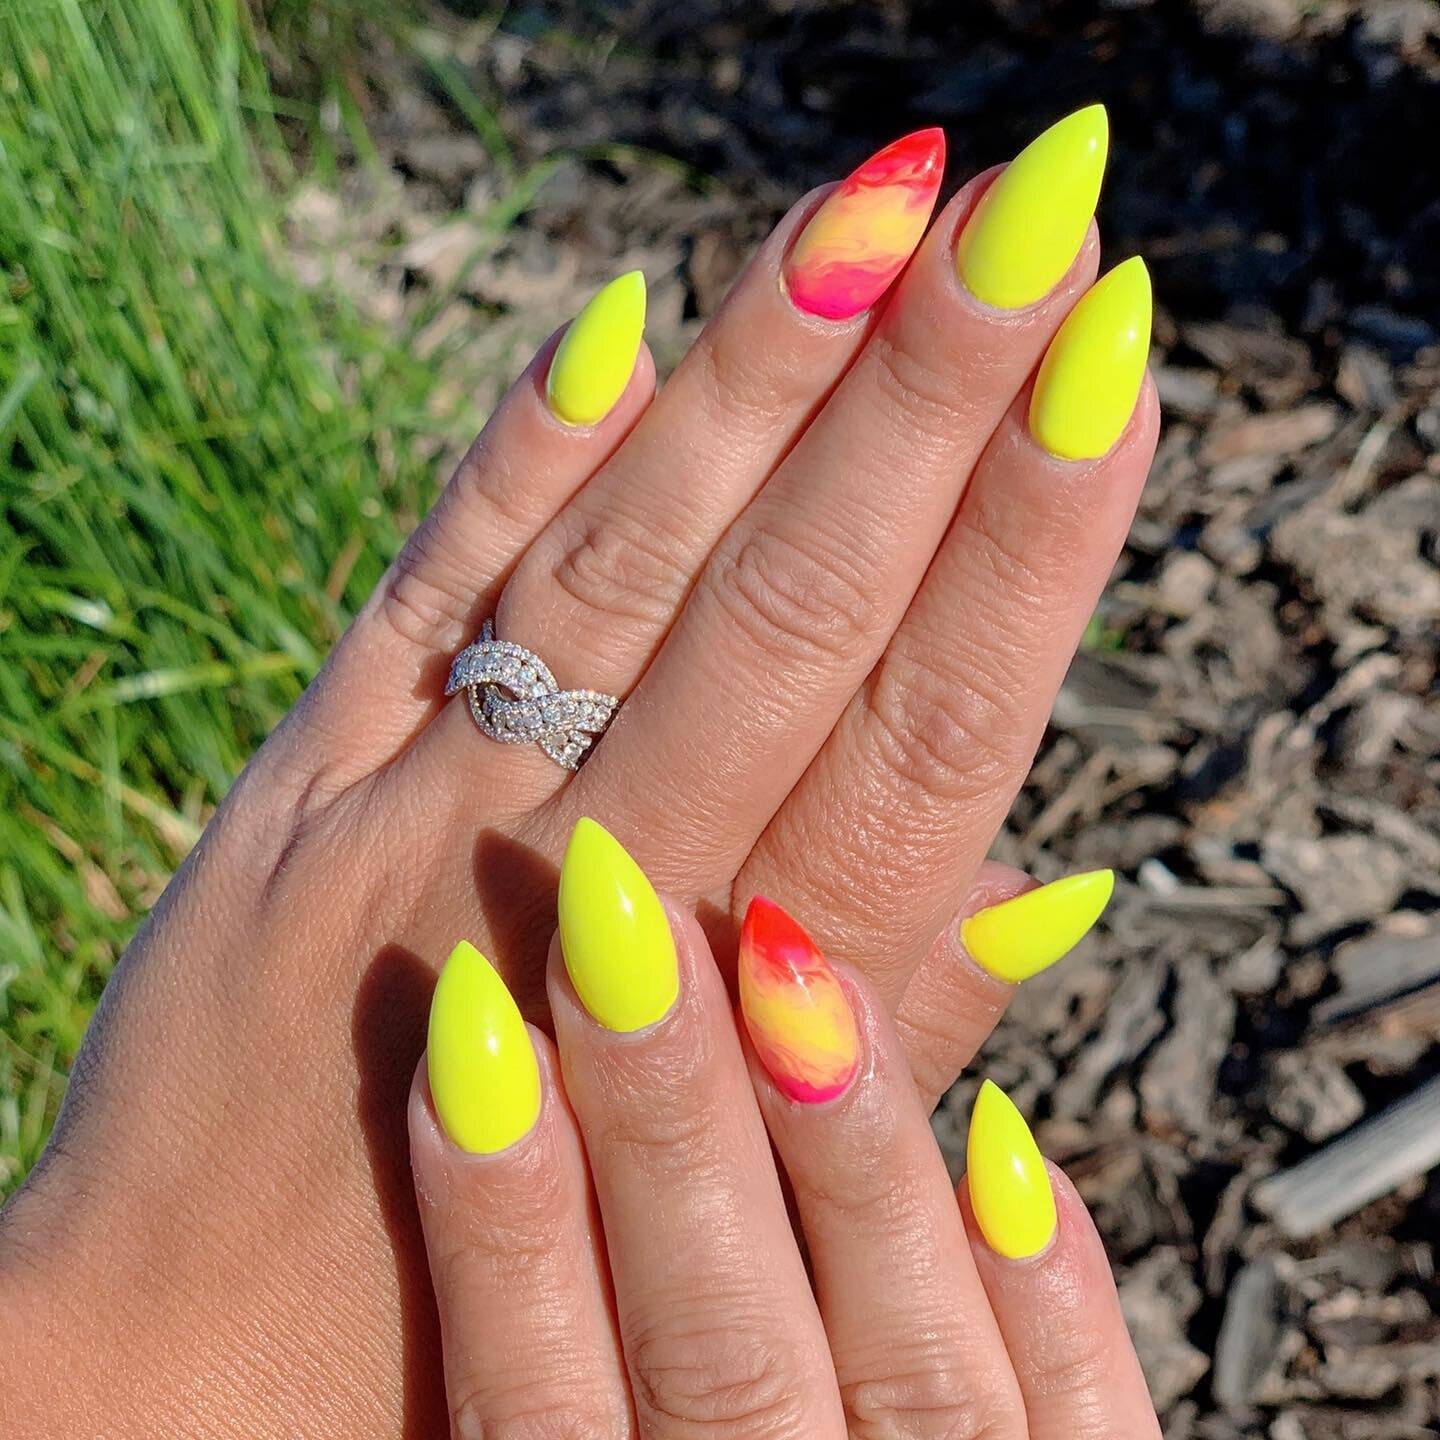 Summer sunset vibes. Let your nails speak for you on your mood and vibe this summer. 🌞✨🌅

#yegnails #shpknails #shpklocal #shpkmoms #shpkbusiness #sherwoodparkmoms #sherwoodpark #sherwoodparknails #sherwoodparksalon